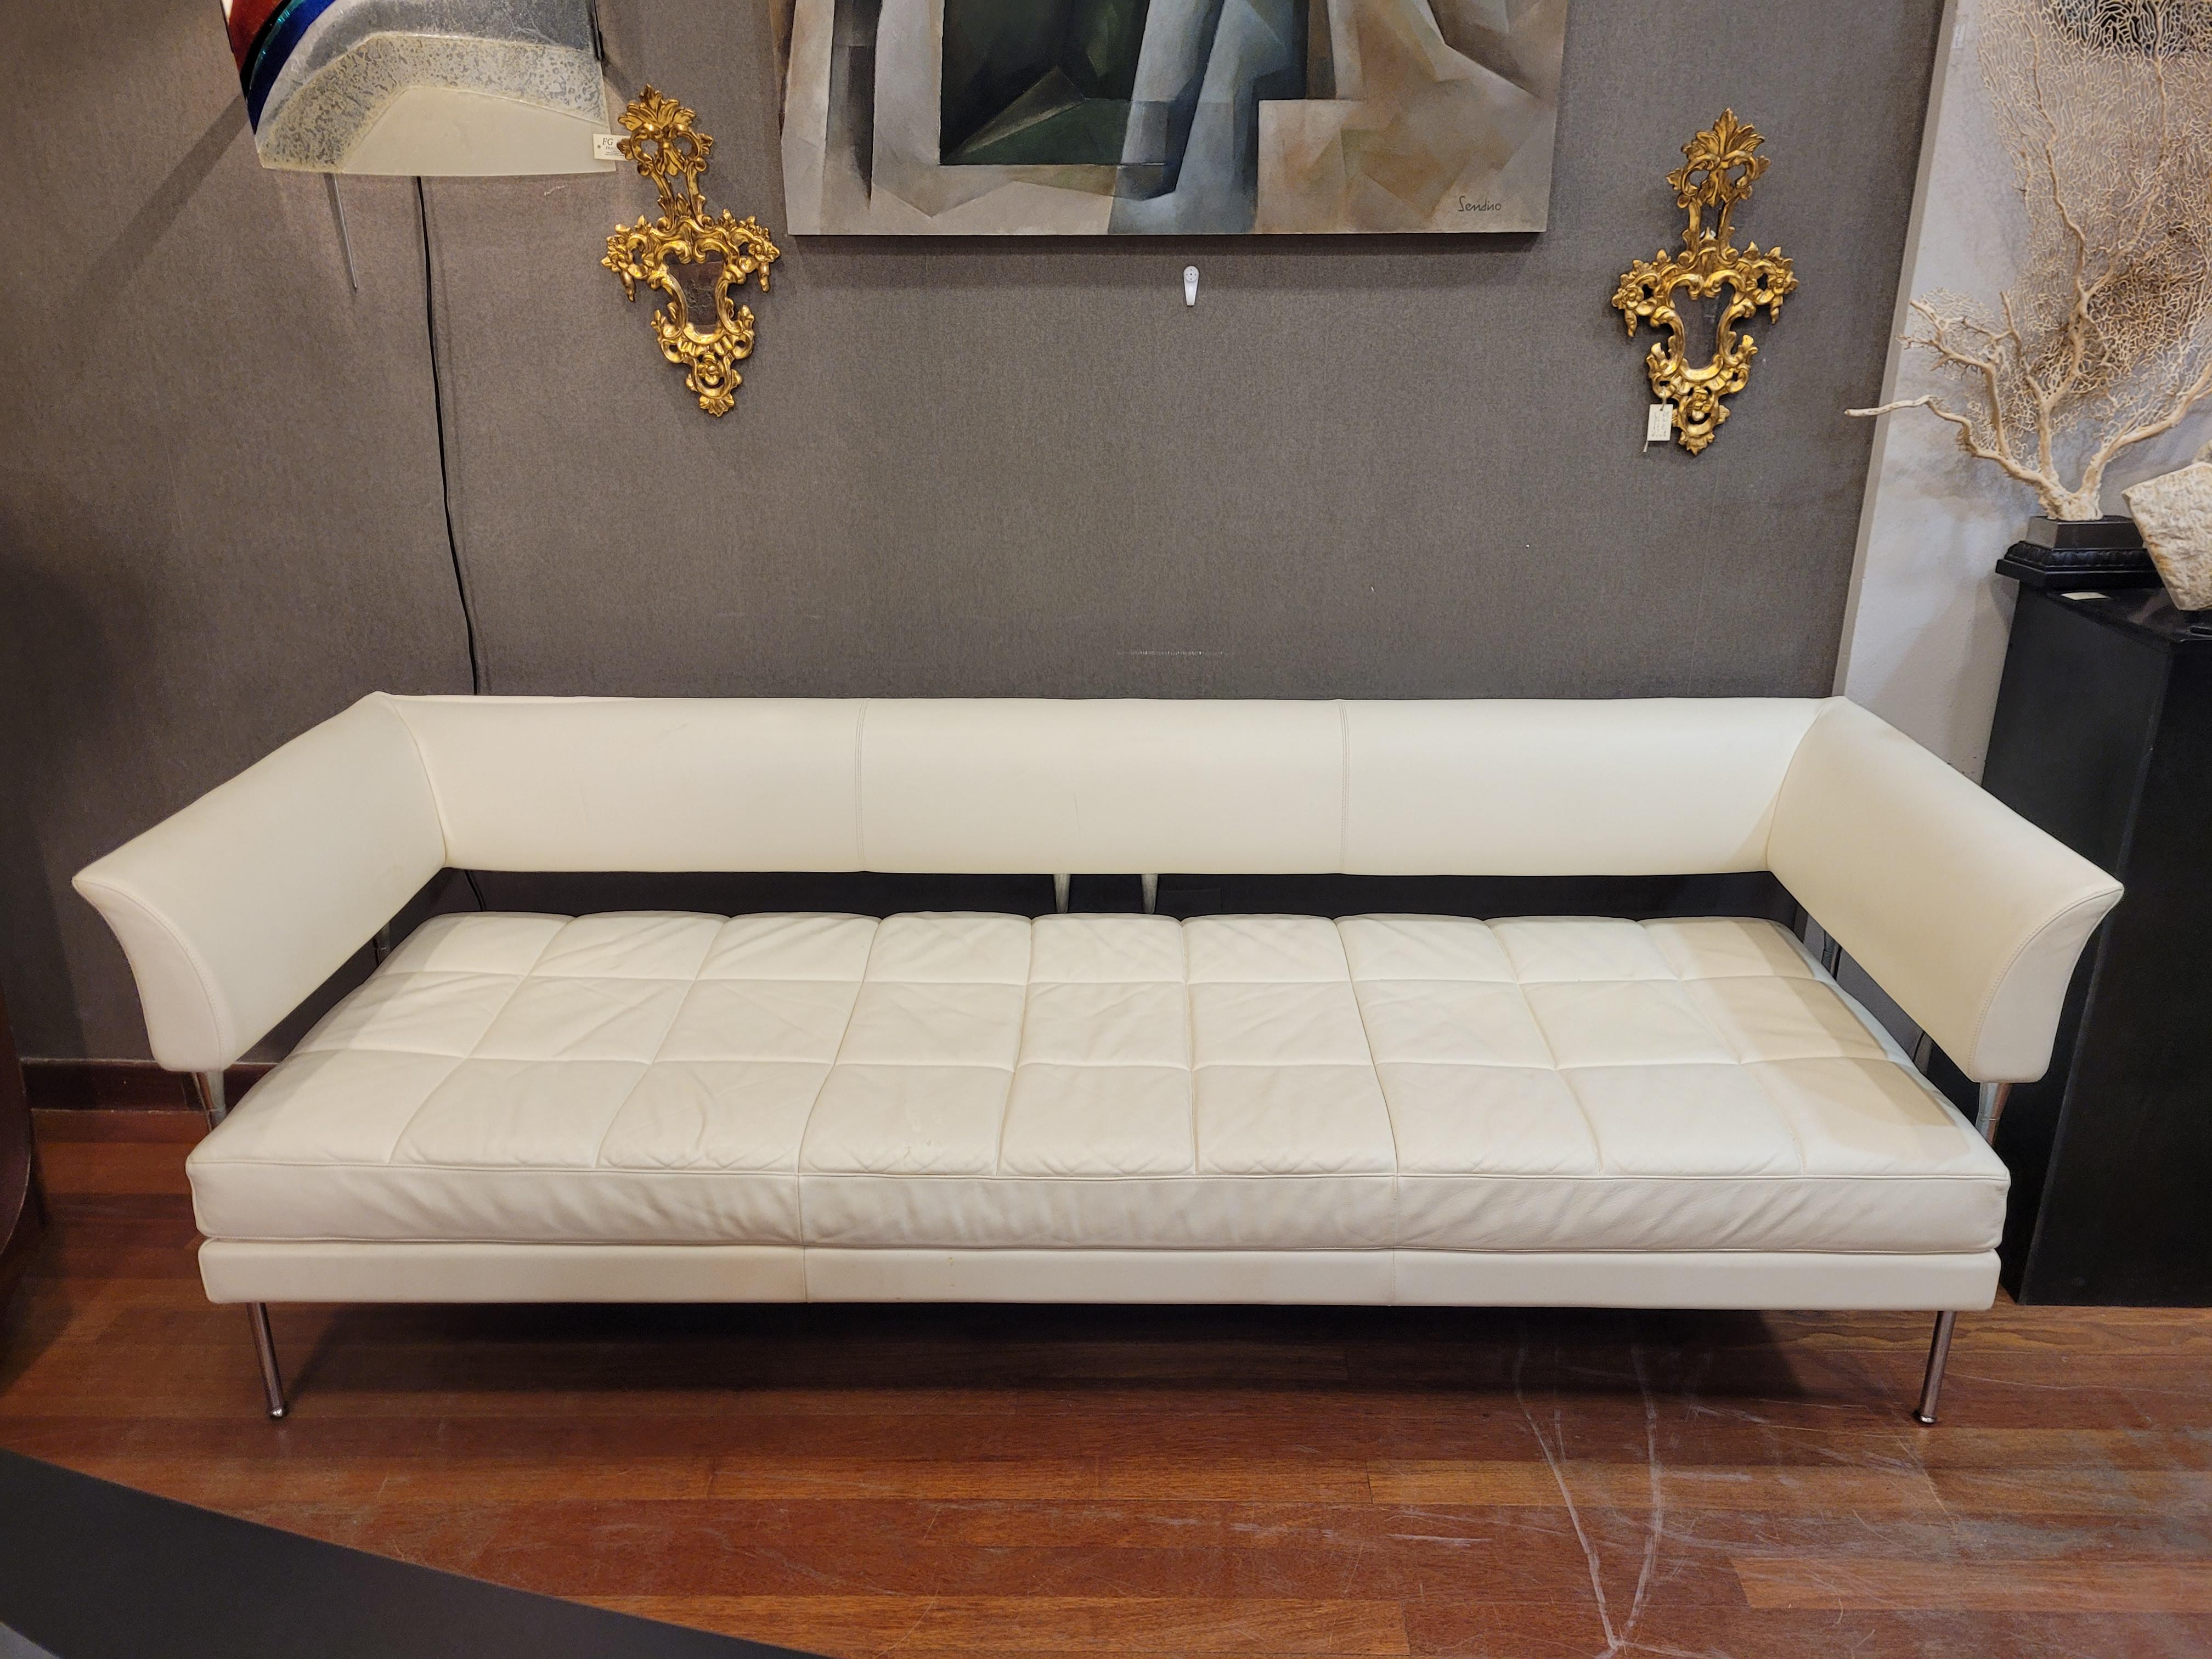 Outstanding Hydra Castor model sofa, with chromed steel structure and white leather upholstery, designed by the Italian architect and designer Luca Scacchetti for the prestigious Casa Poltrona Frau. It is a sleek and modern design that reflects the